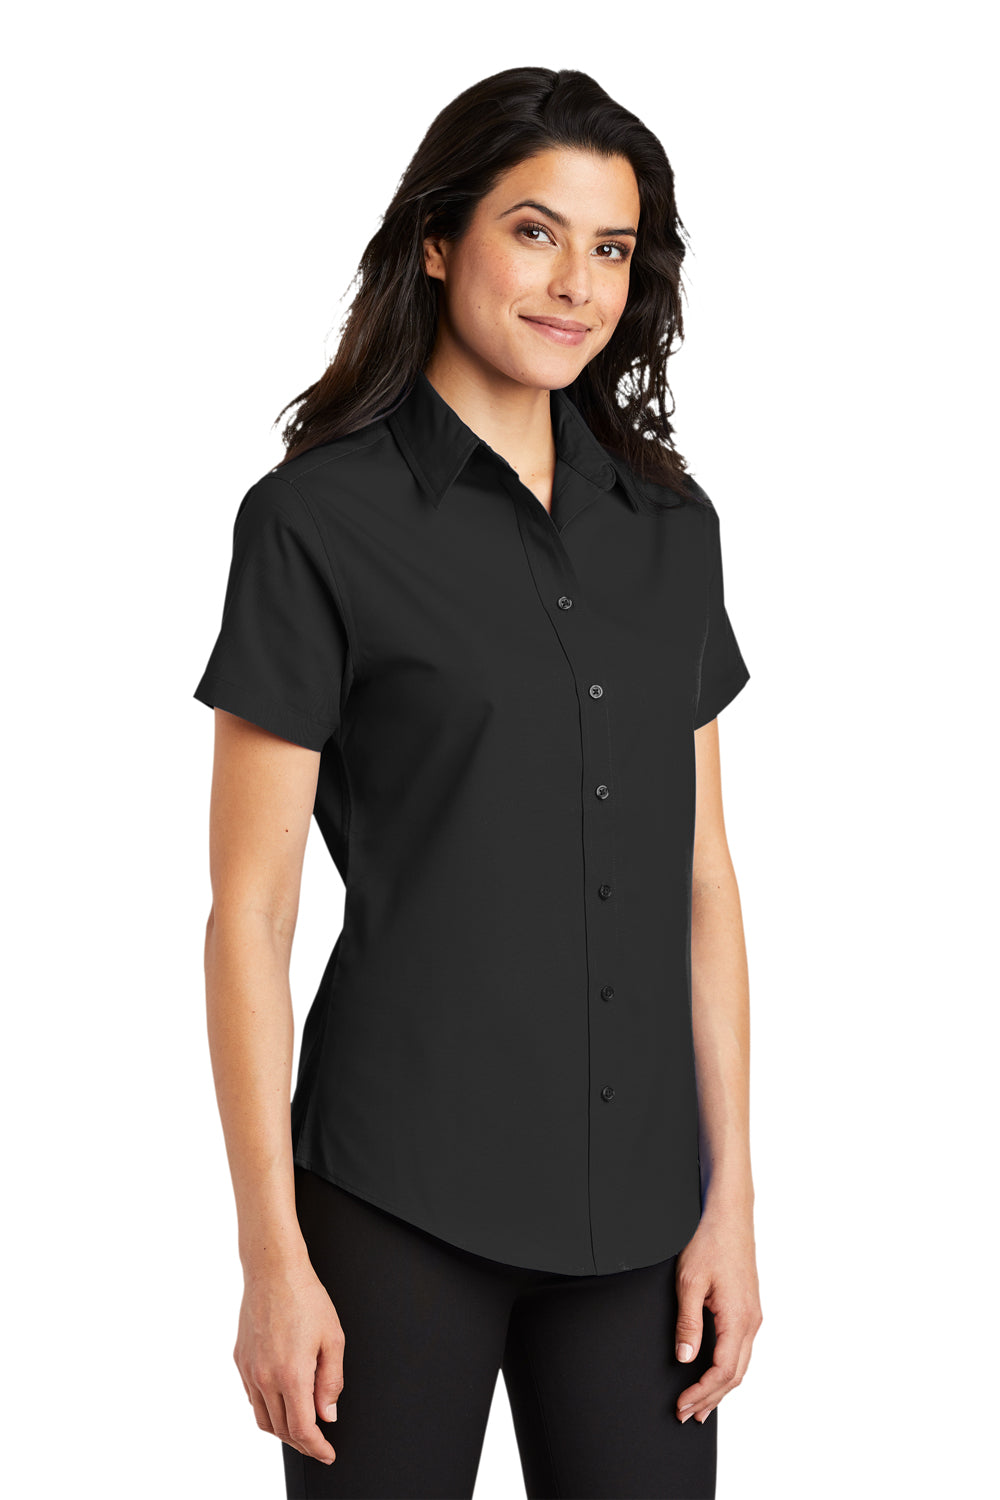 Port Authority L508 Womens Easy Care Wrinkle Resistant Short Sleeve Button Down Shirt Black 3Q